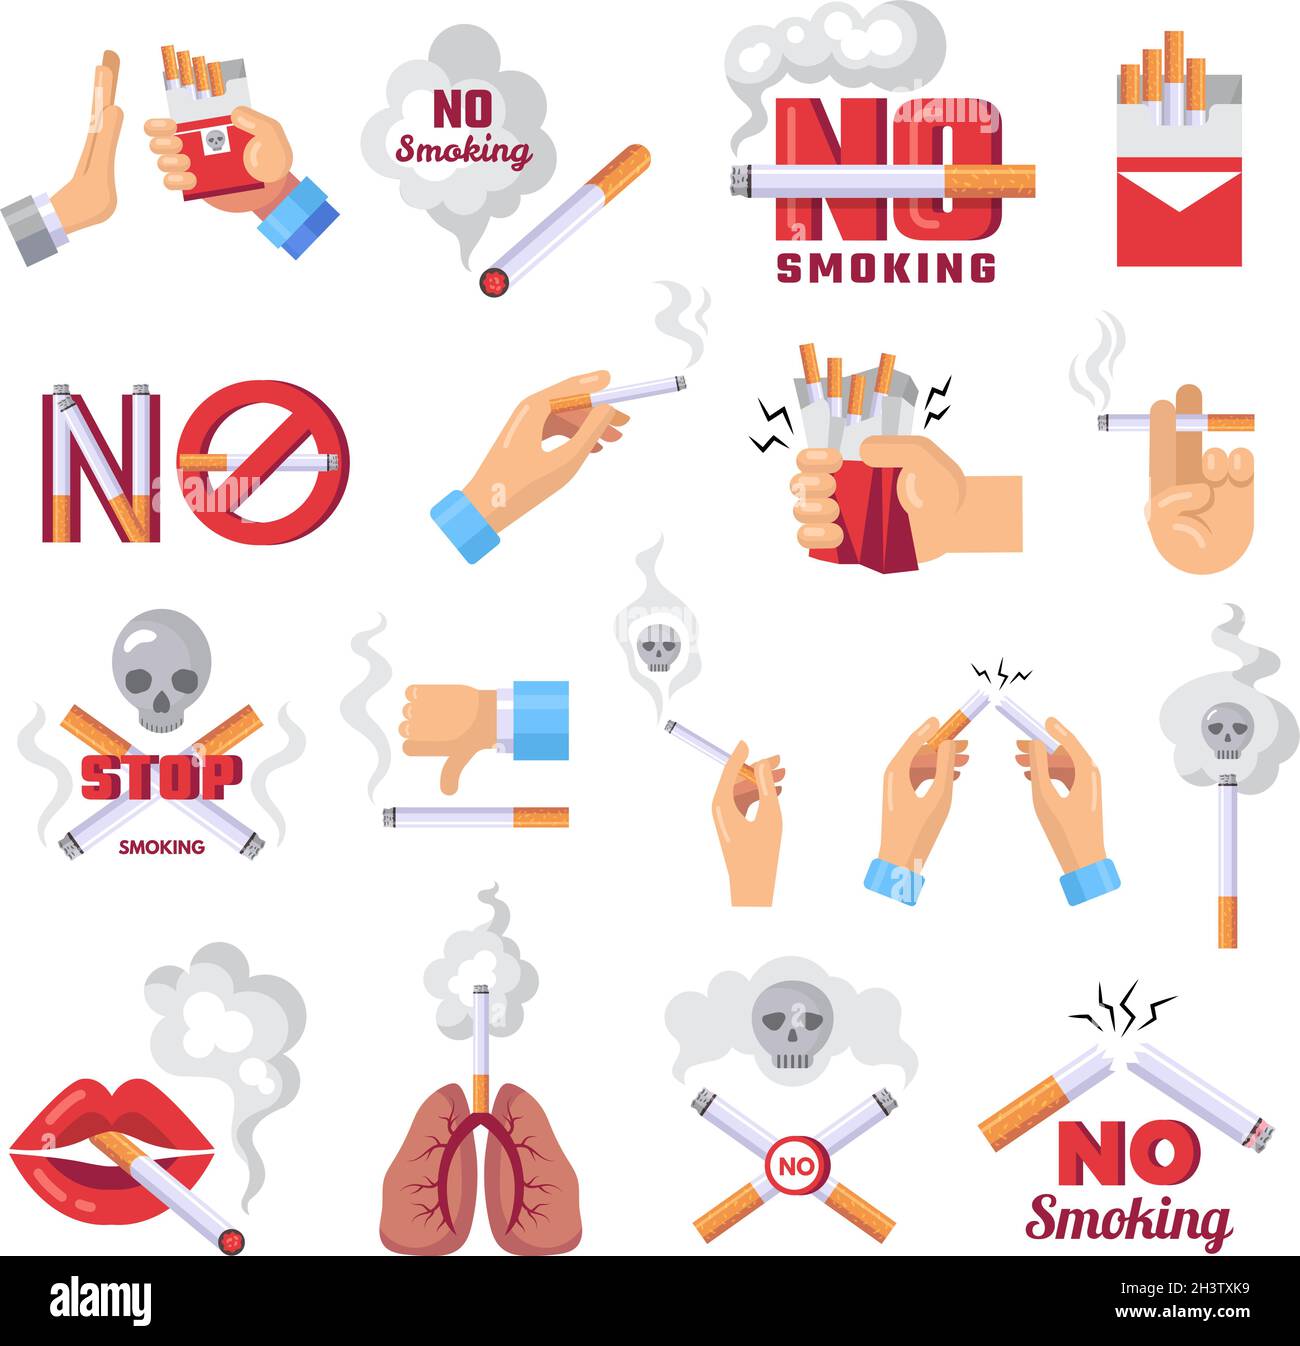 Cigarette icon. Dangerous from smoke of cigarettes vector lungs protection concept illustrations Stock Vector